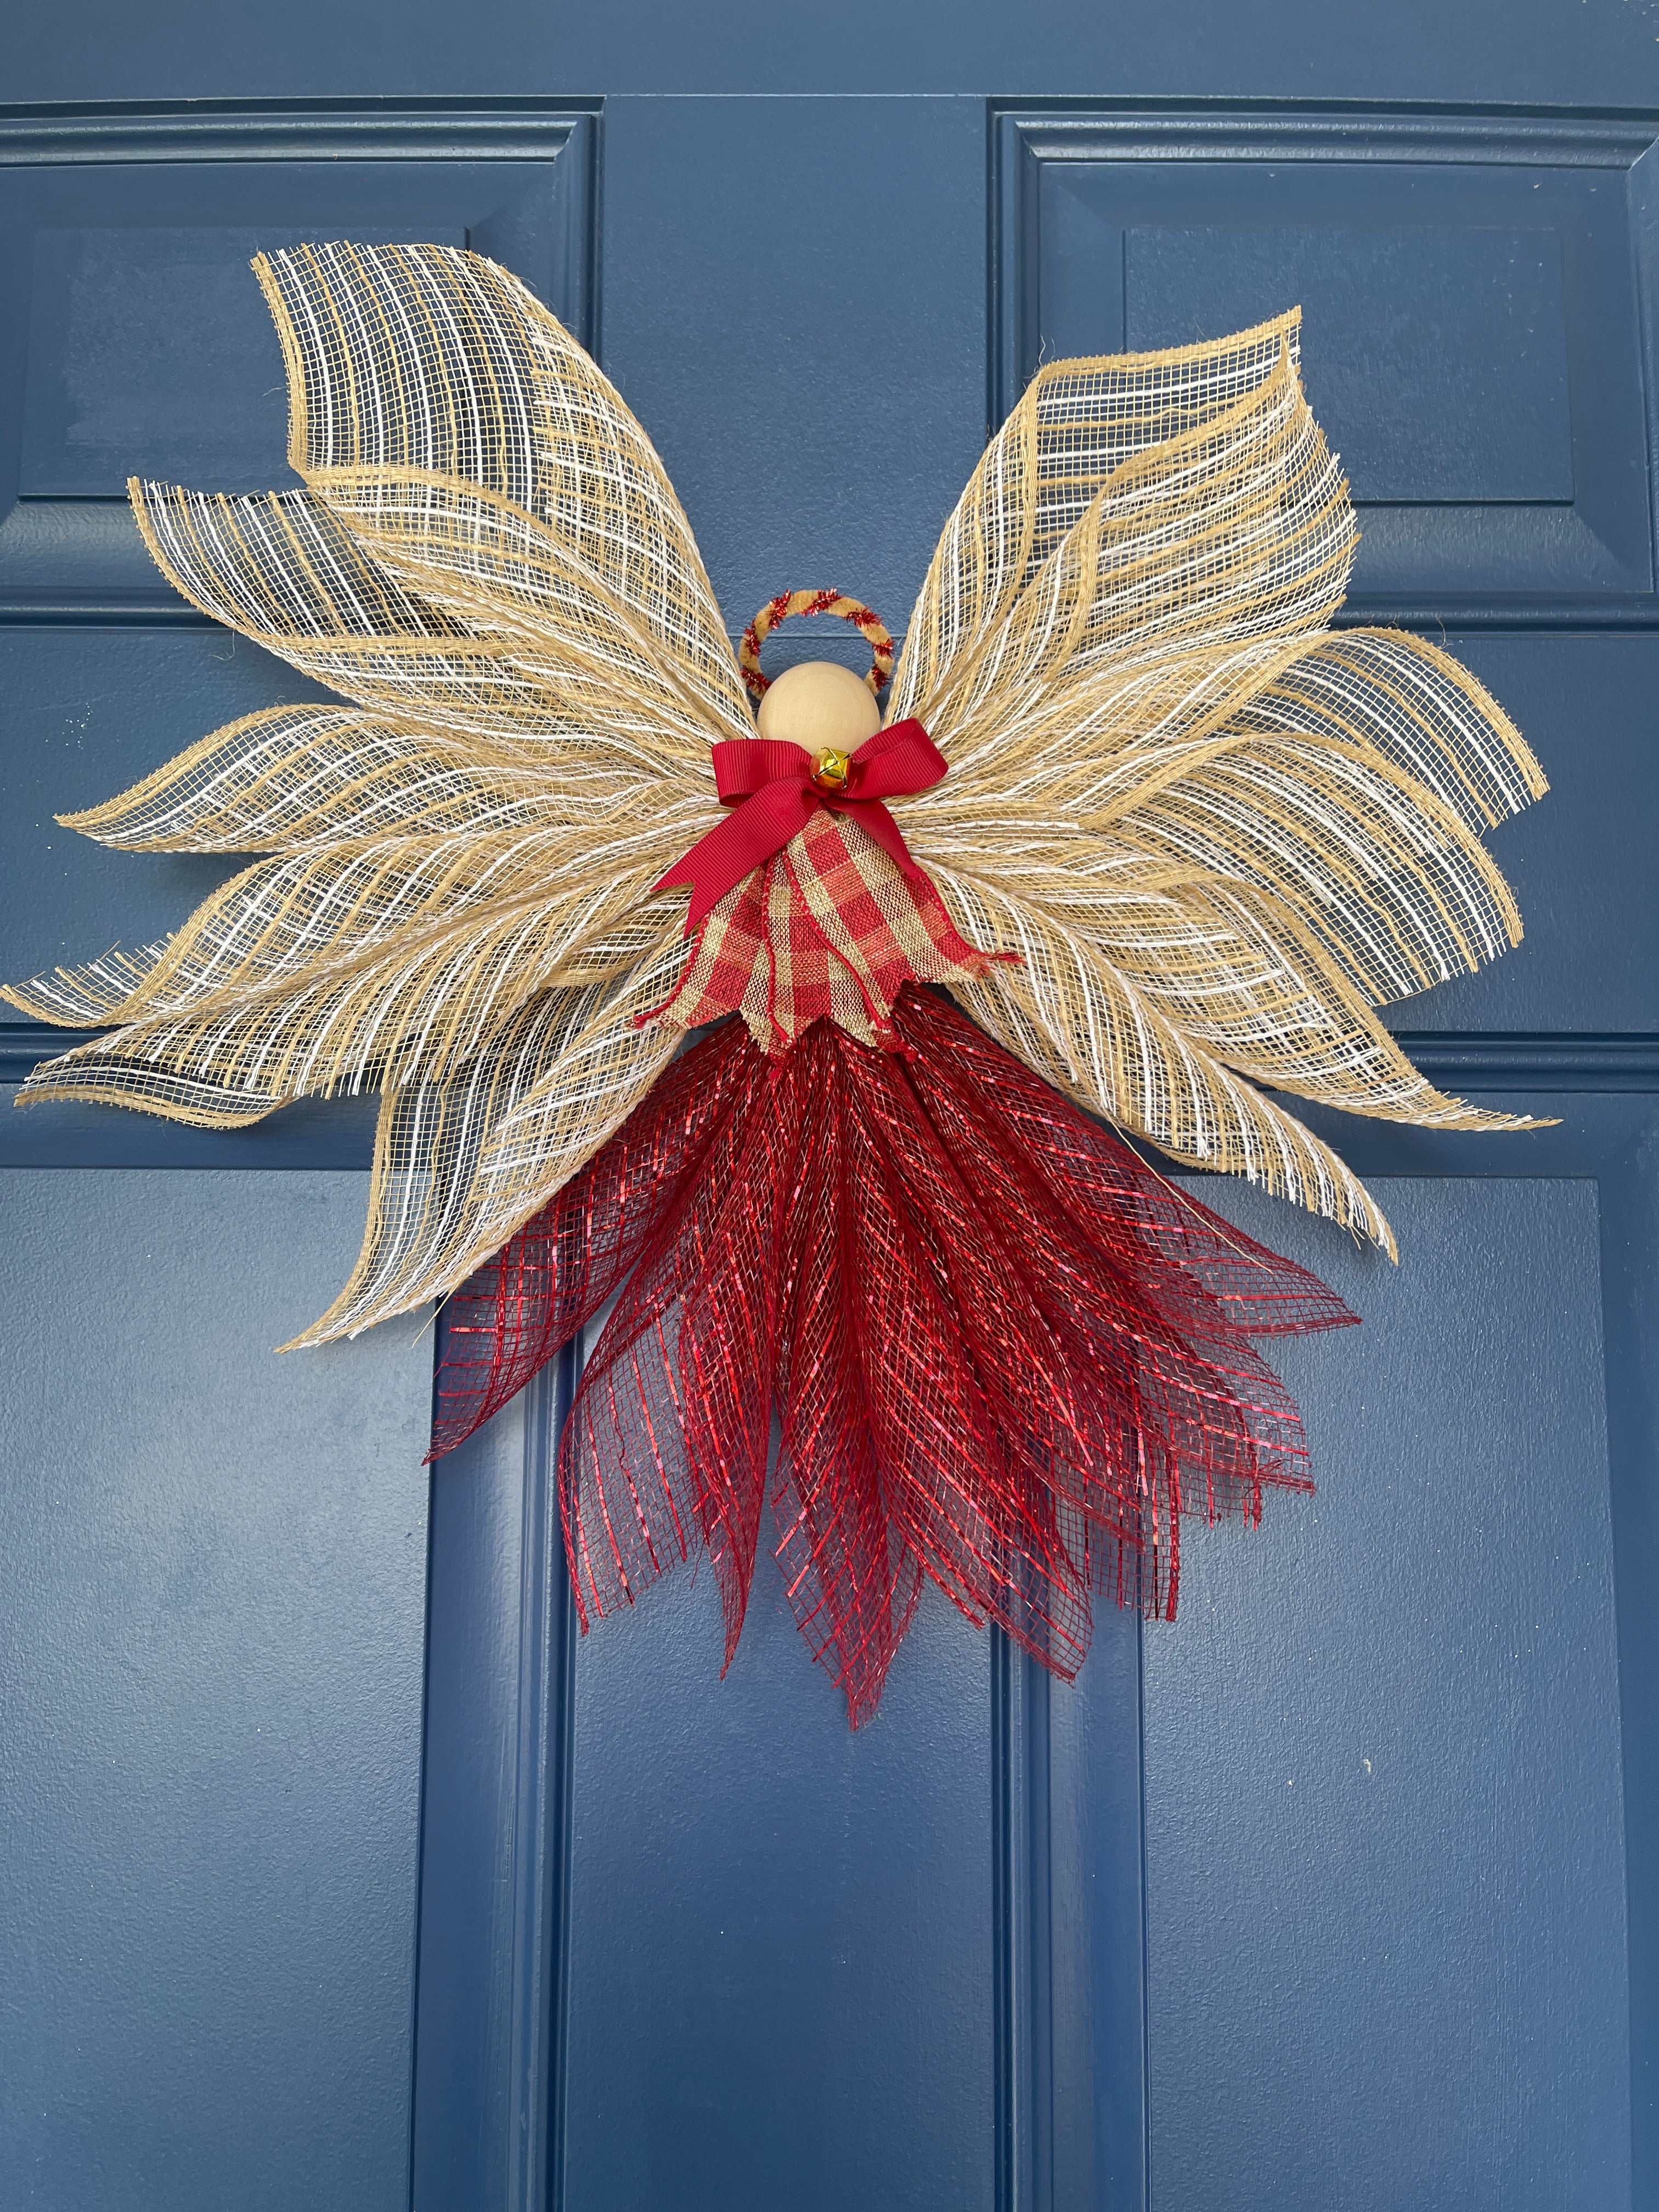 Bottom View of Rustic Farmhouse Jute Burlap and Red Metallic Angel Tree Topper with Red and Tan Plaid Apron, Red Bow, Gold Bell and Wooden Head on a Blue Door